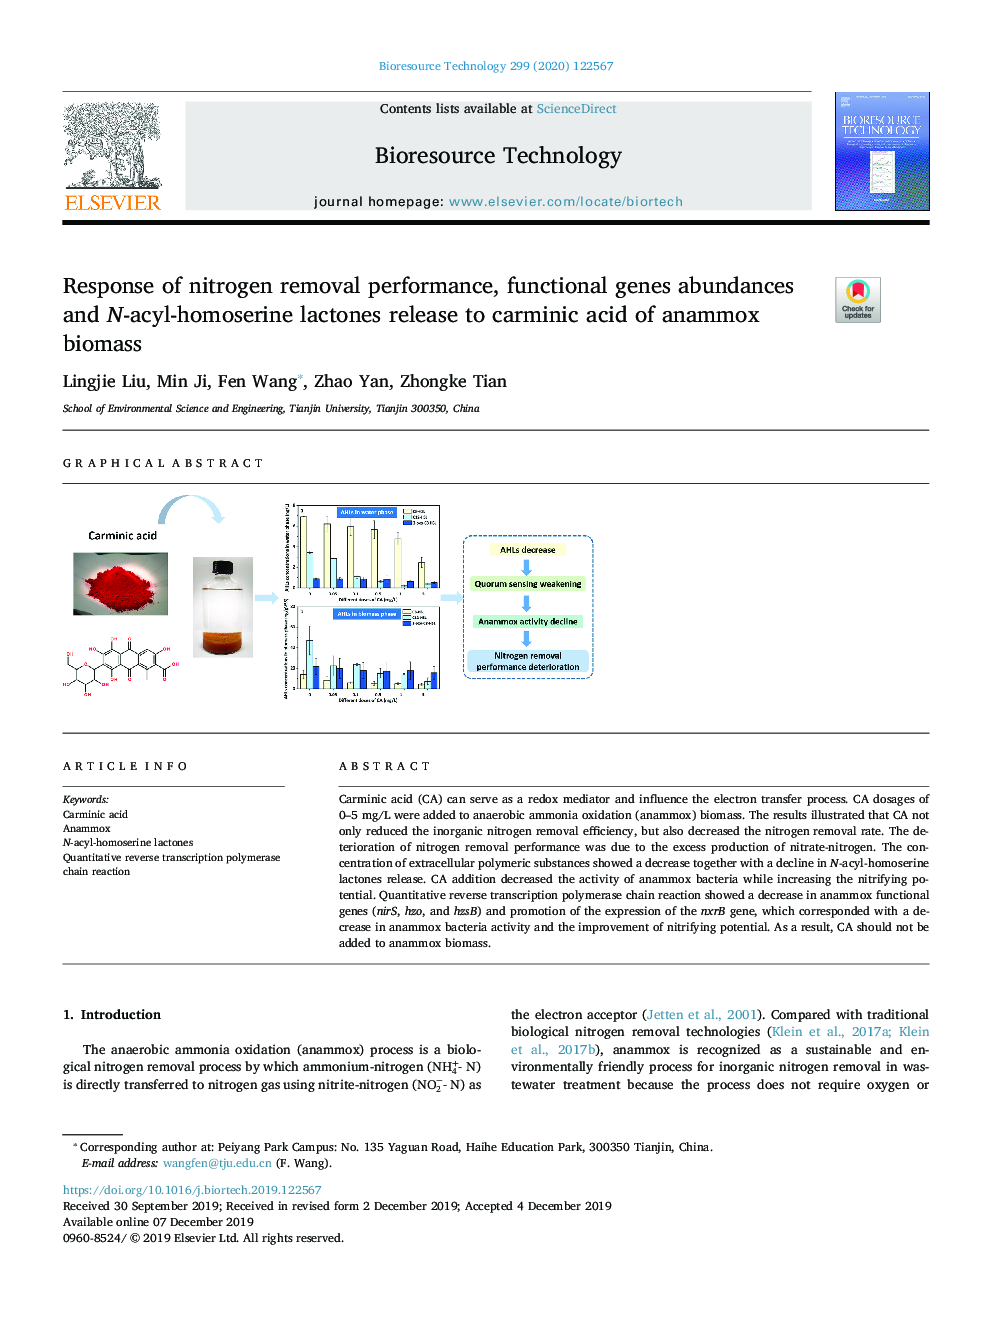 Response of nitrogen removal performance, functional genes abundances and N-acyl-homoserine lactones release to carminic acid of anammox biomass